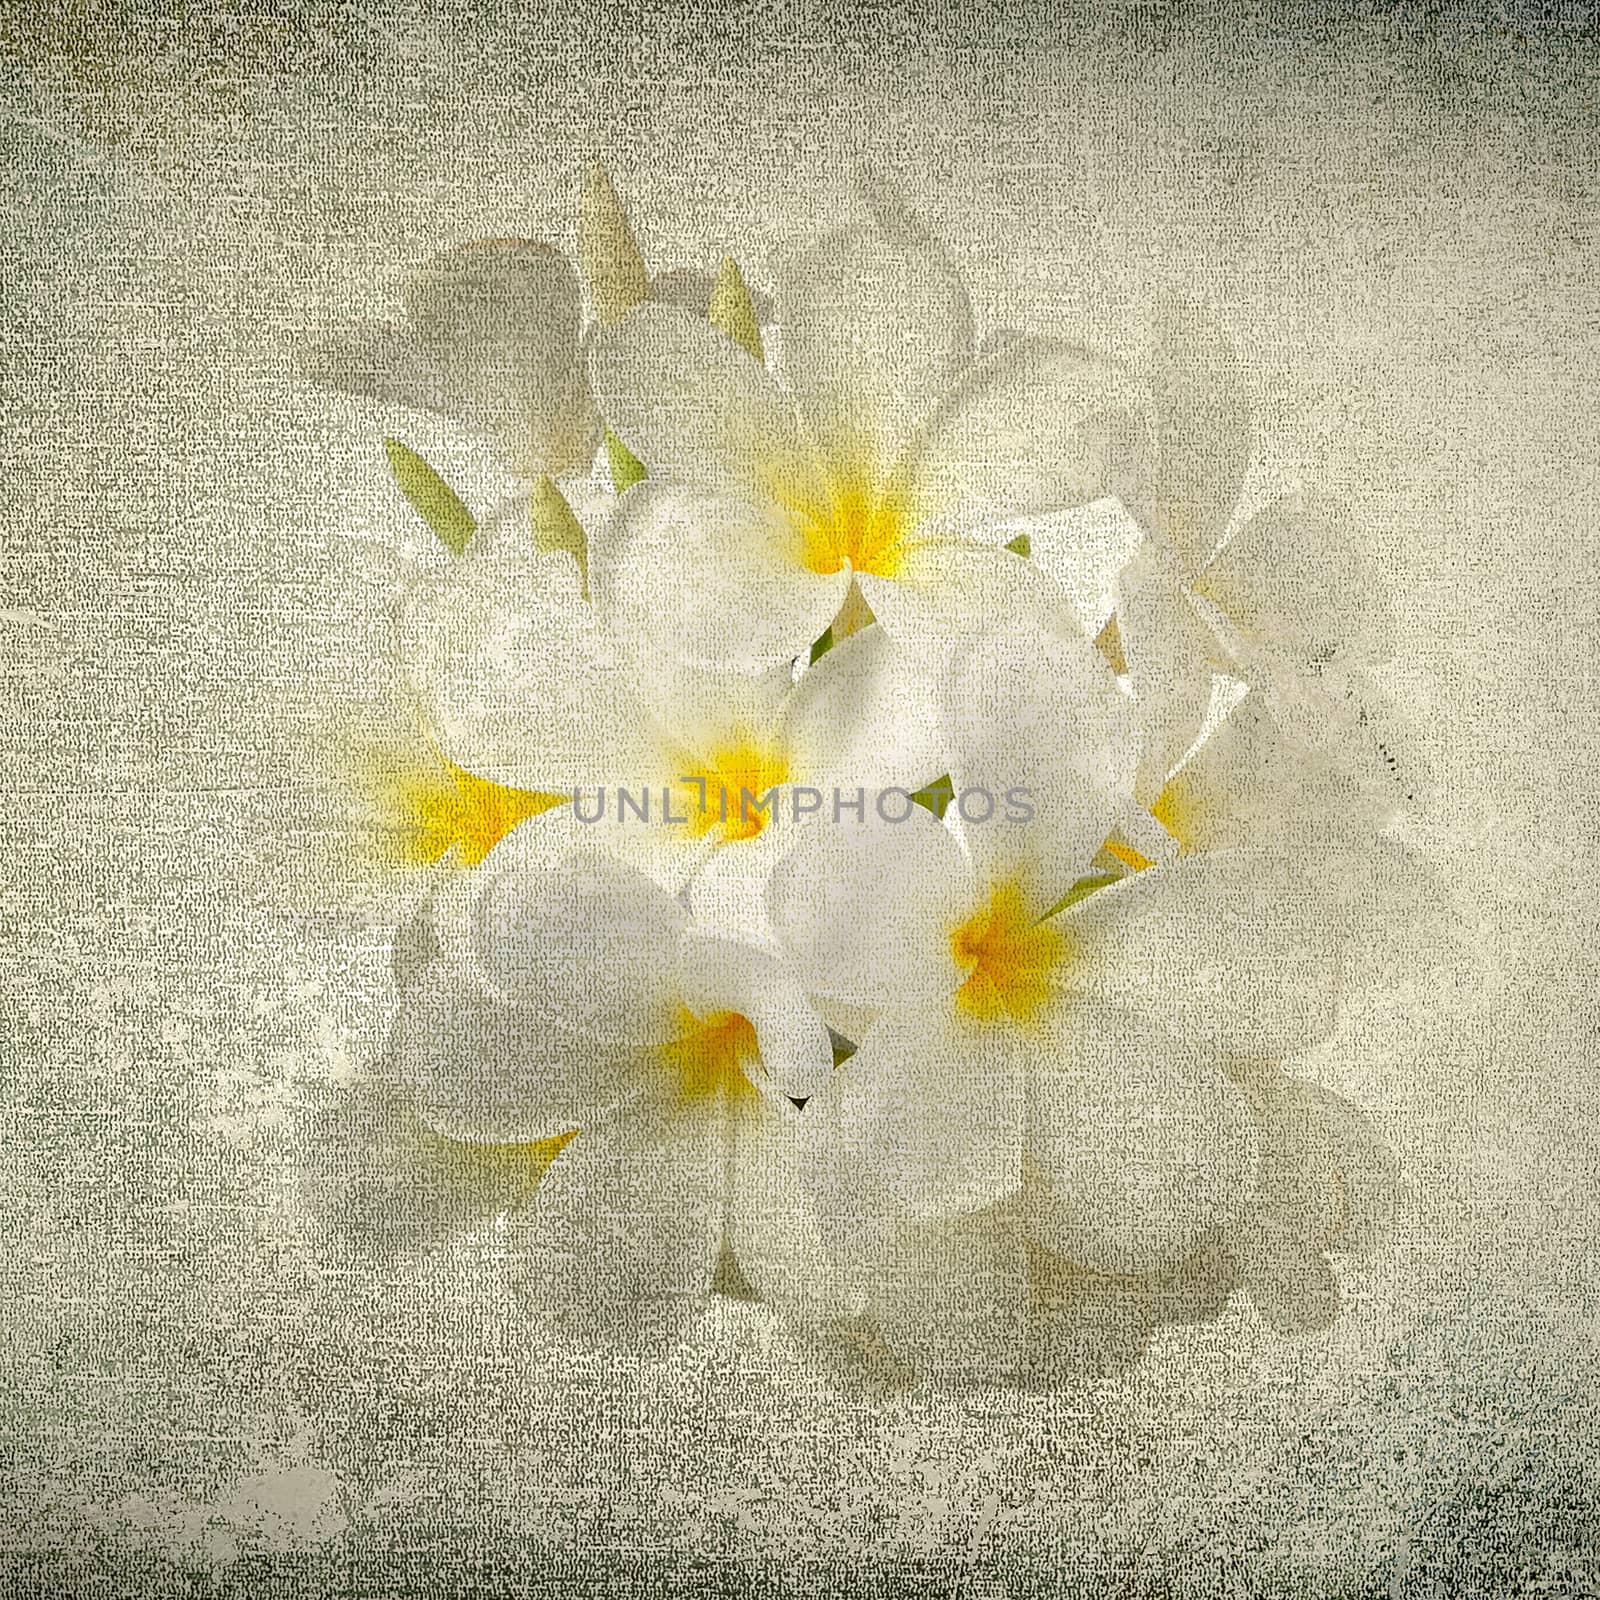 frangipani flower in the grunge paper 